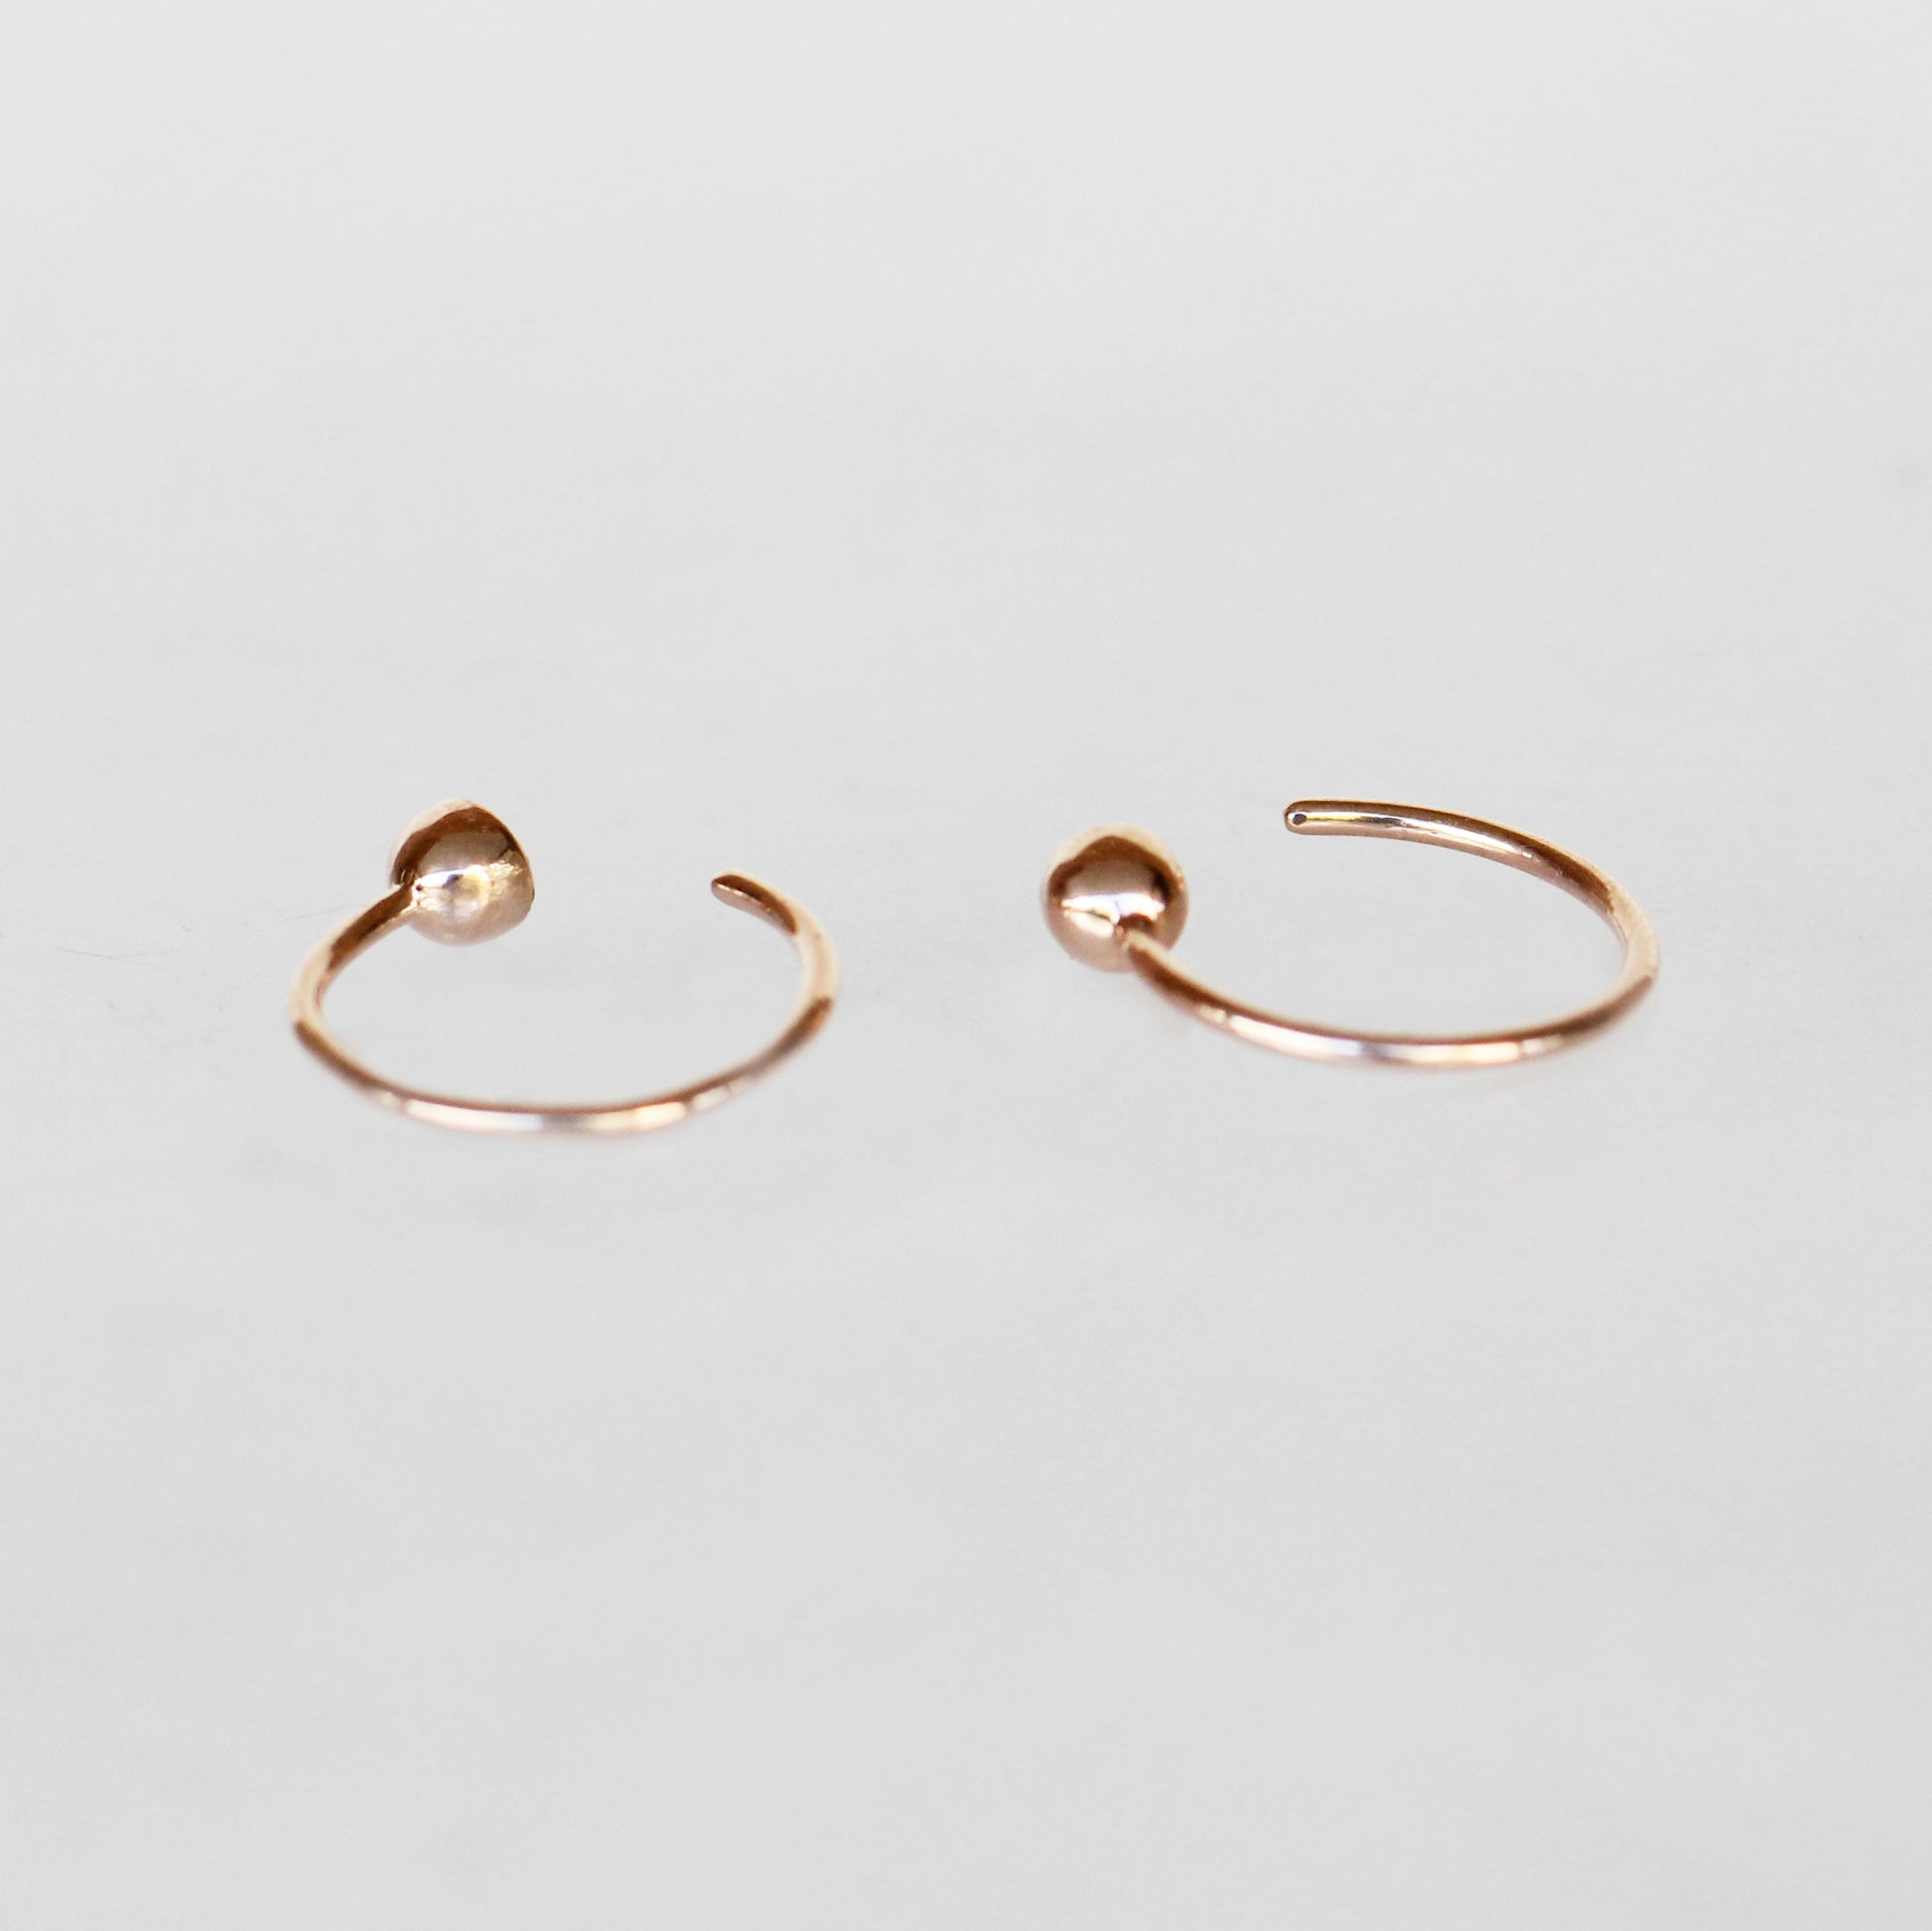 Harper Earrings with Gray Celestial Diamonds - 14k Rose Gold- Ready to ship - Midwinter Co. Alternative Bridal Rings and Modern Fine Jewelry